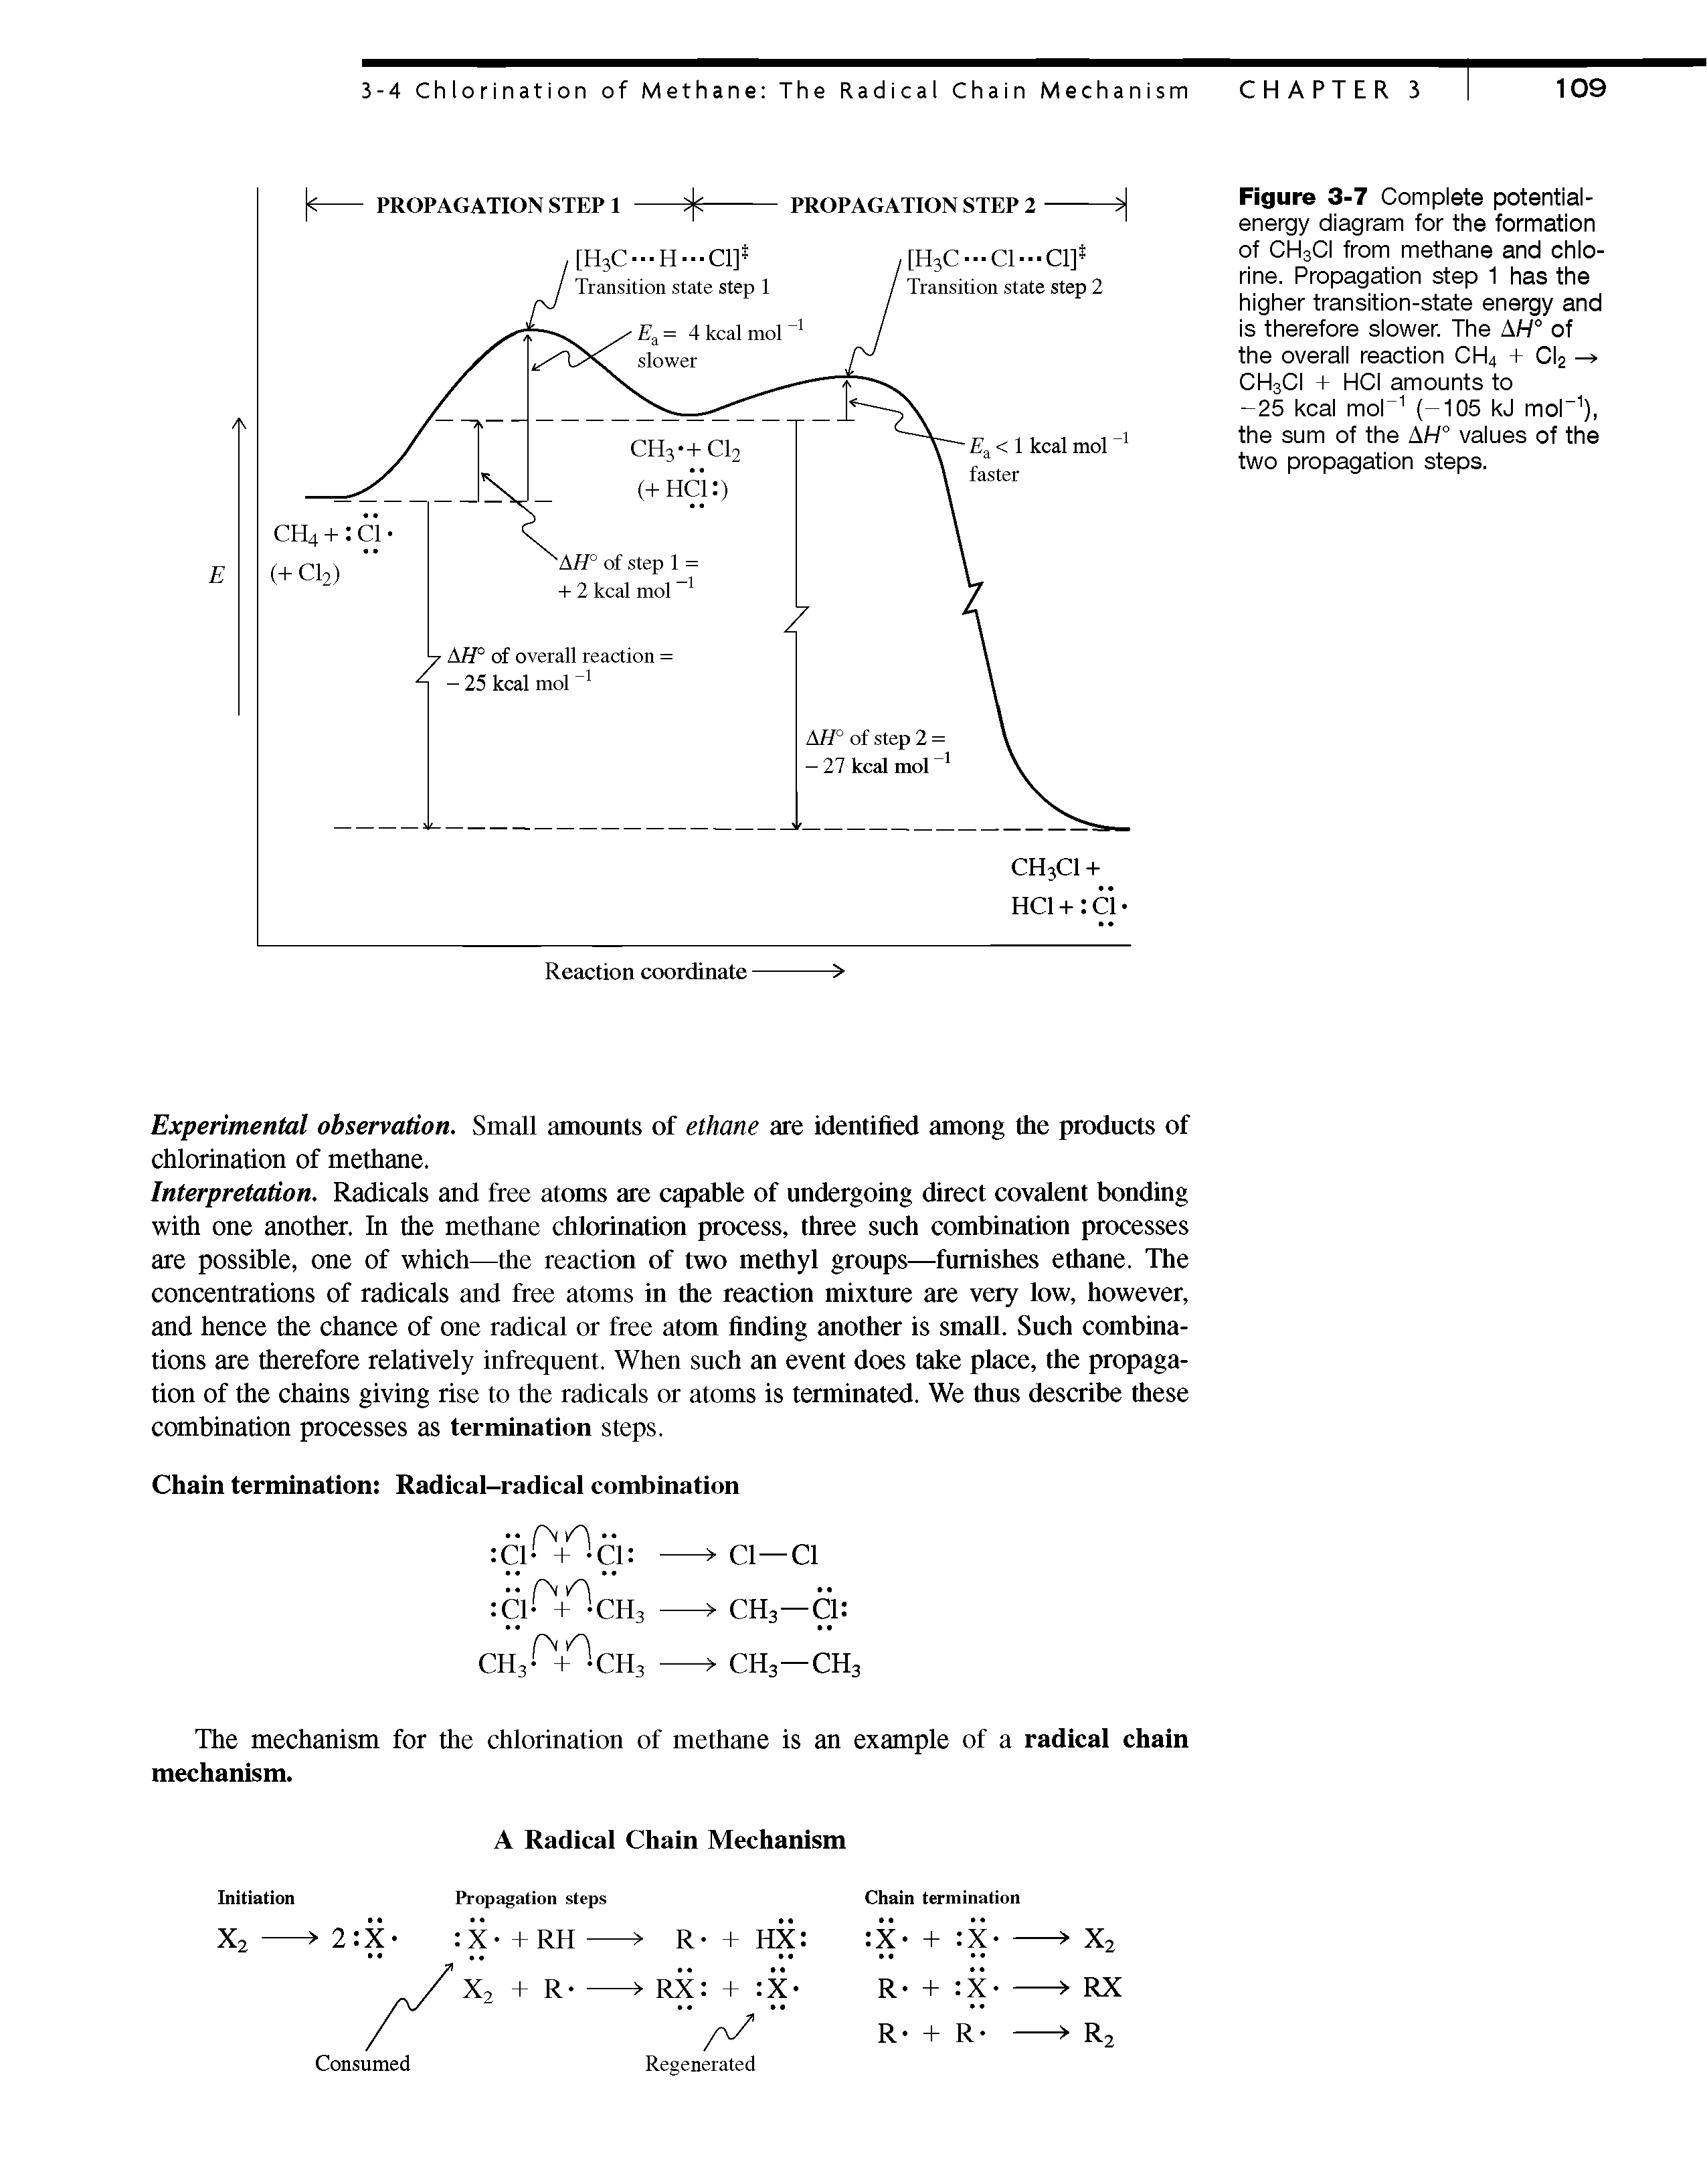 Figure 3-7 Compiete potential-energy diagram for the formation of CH3CI from methane and chlorine. Propagation step 1 has the higher transition-state energy and is therefore slower. The AH° of the overall reaction CH4 + CI2 CH3CI + HCI amounts to -25 kcal mol" (-105 kJ mol" ), the sum of the AH° values of the two propagation steps.